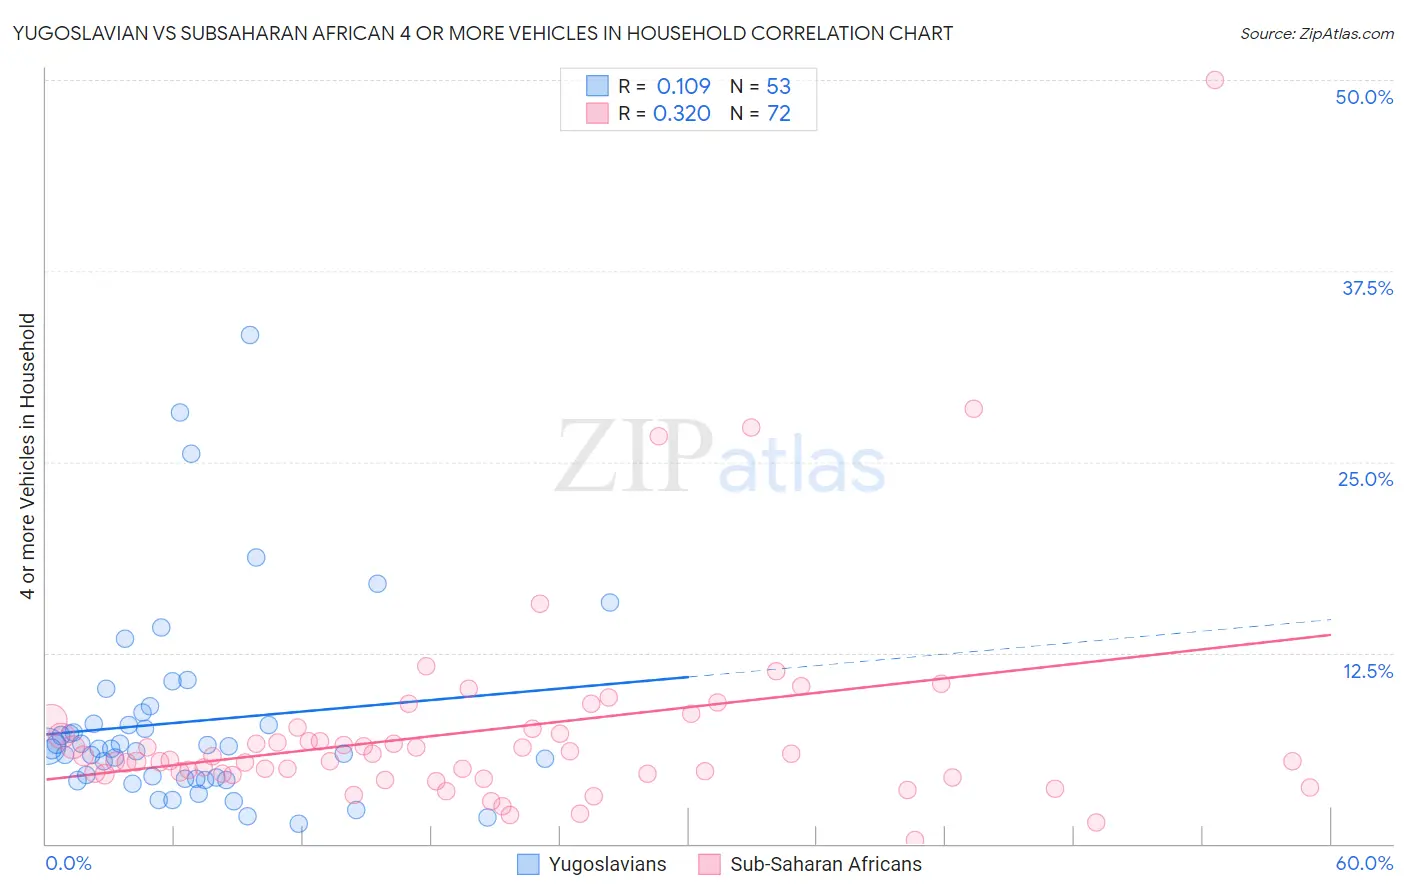 Yugoslavian vs Subsaharan African 4 or more Vehicles in Household